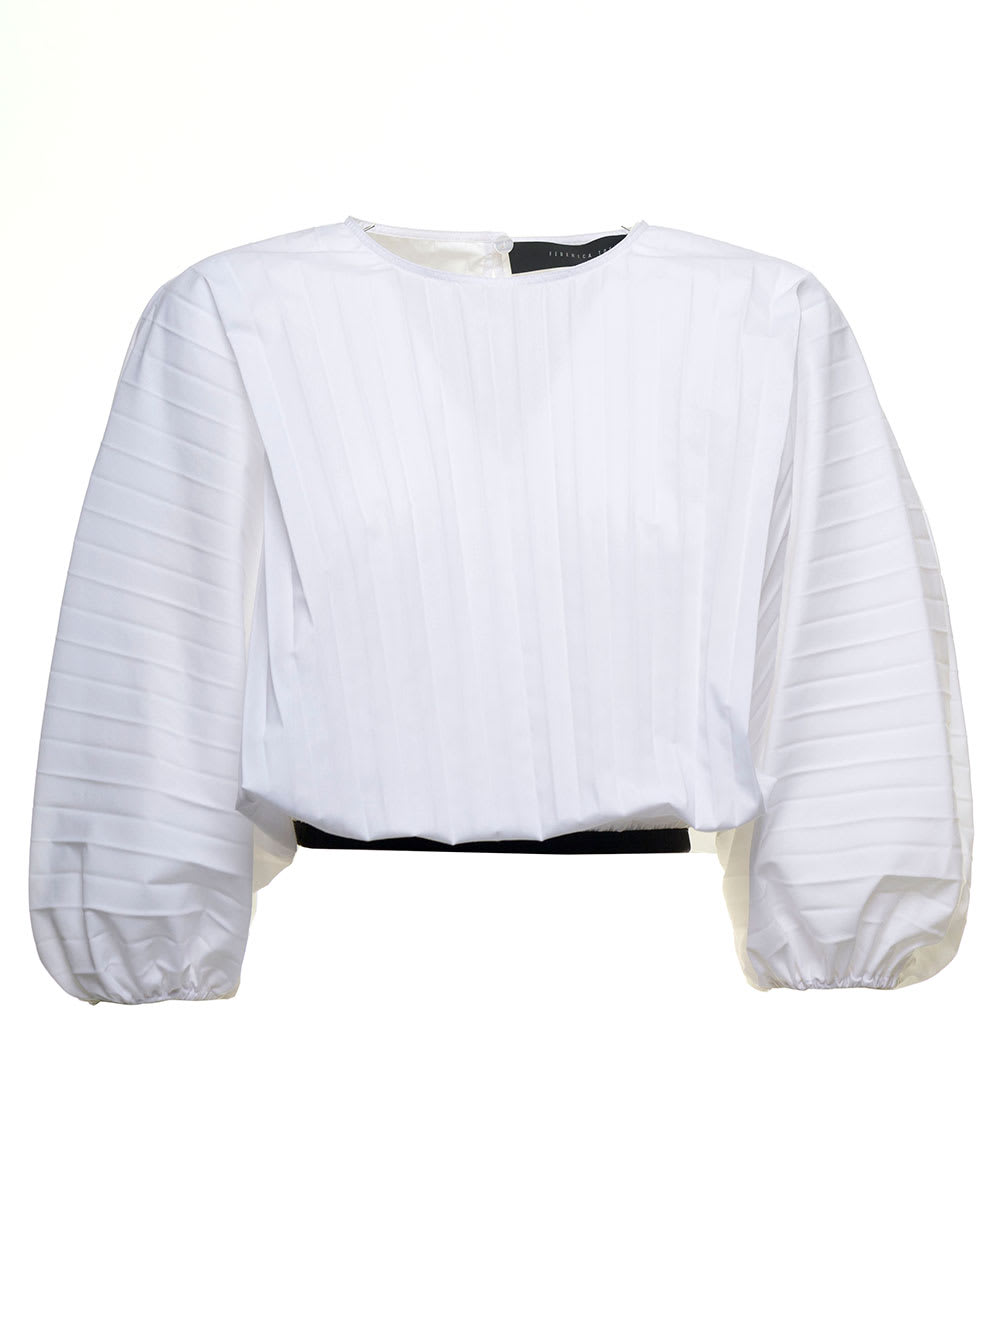 Federica Tosi Cropped Pleated Cotton Blouse